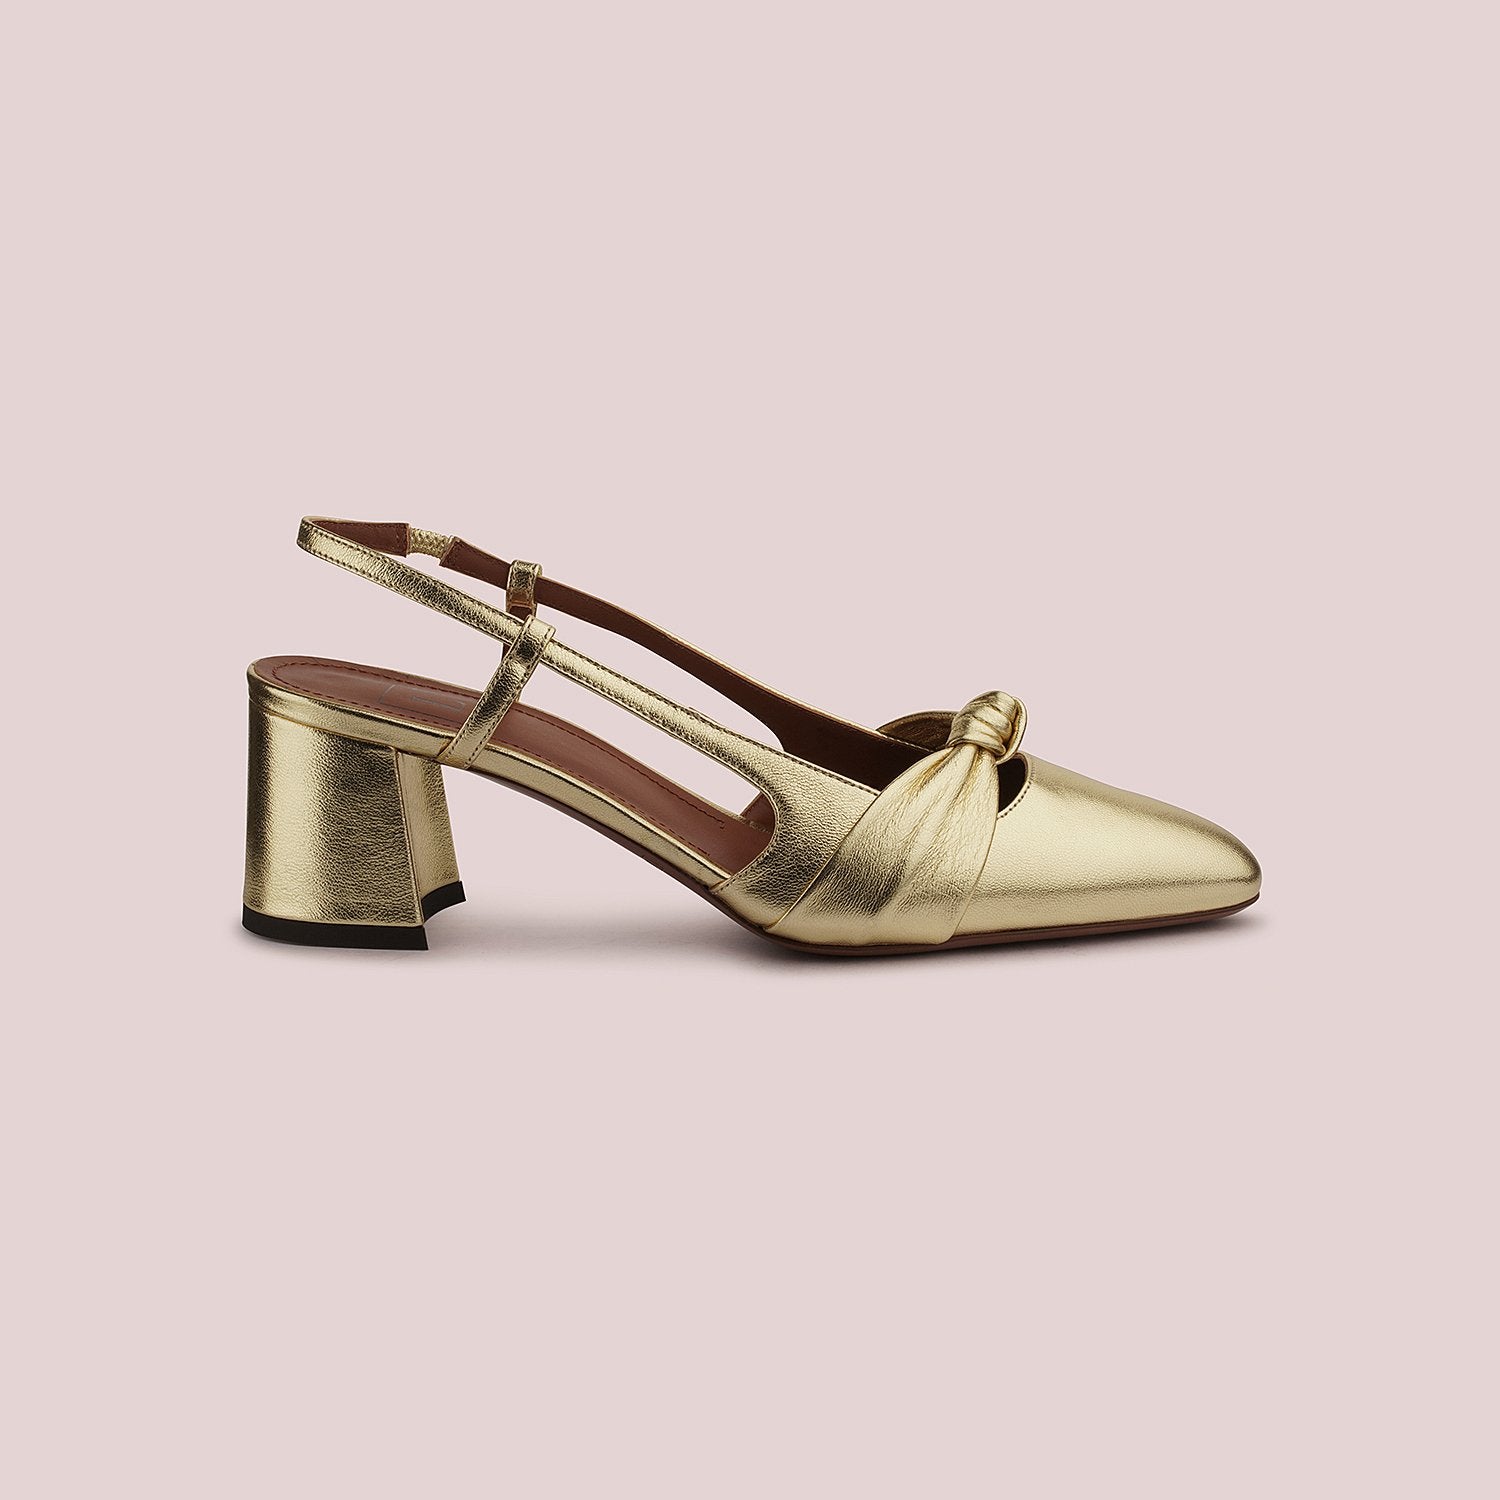 Gold Leather Slingback Shoes Heels LDL039.60CP29145003 - 4